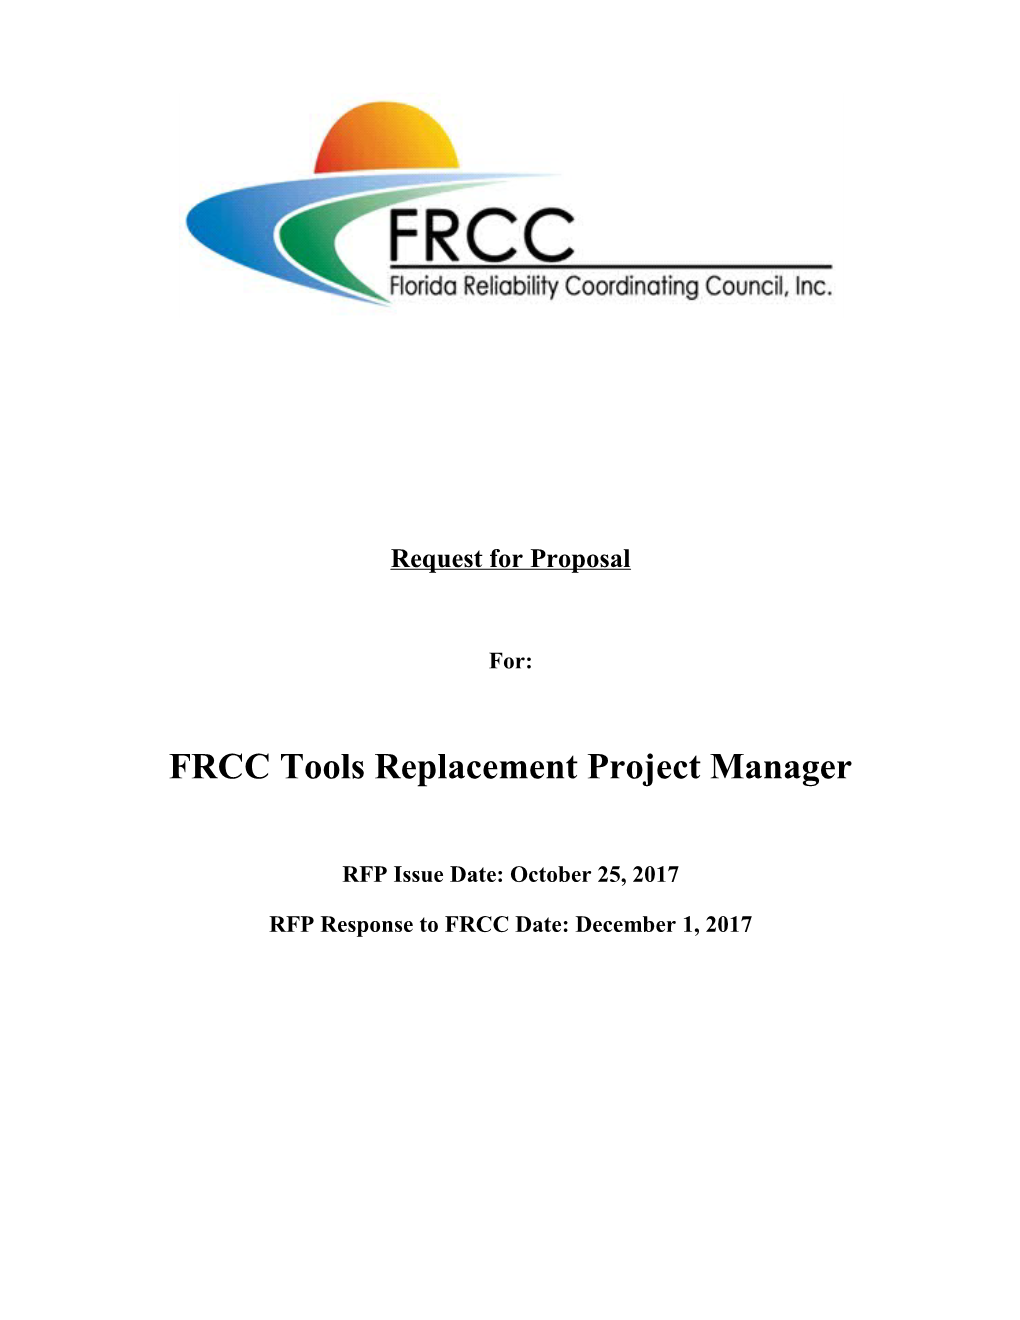 FRCC Tools Replacement Project Manager